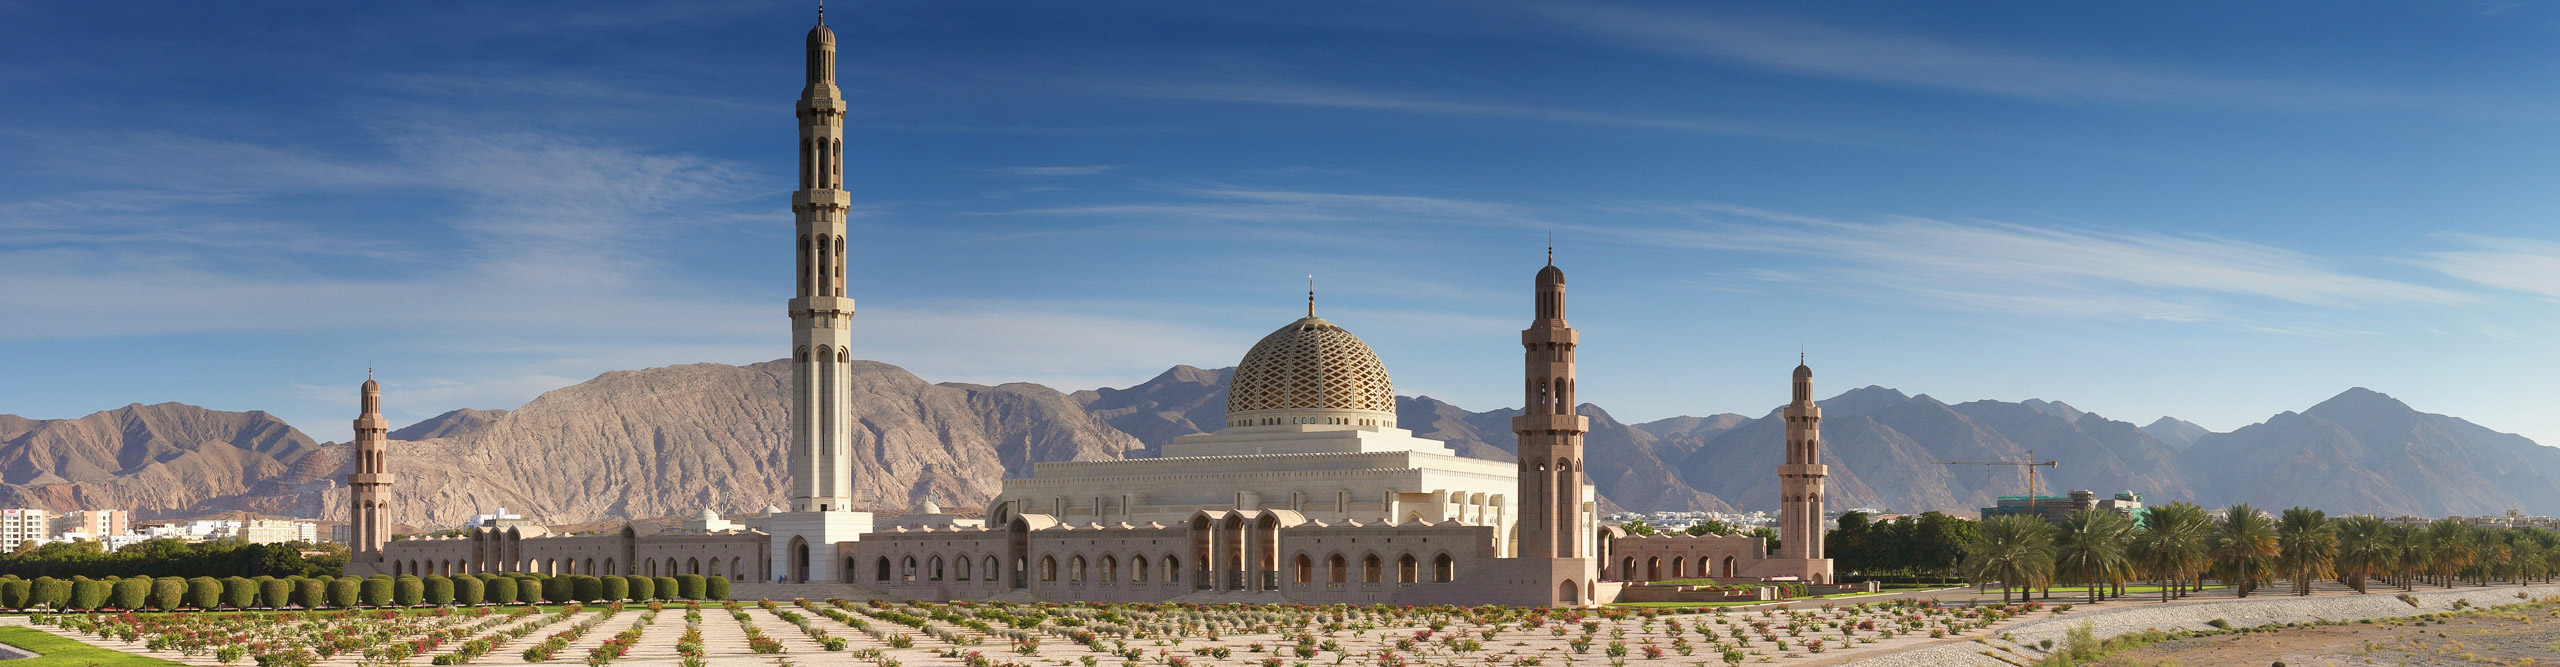 The Grand mosque, Muscat, Oman on a clear sunny day with mountains in the background 